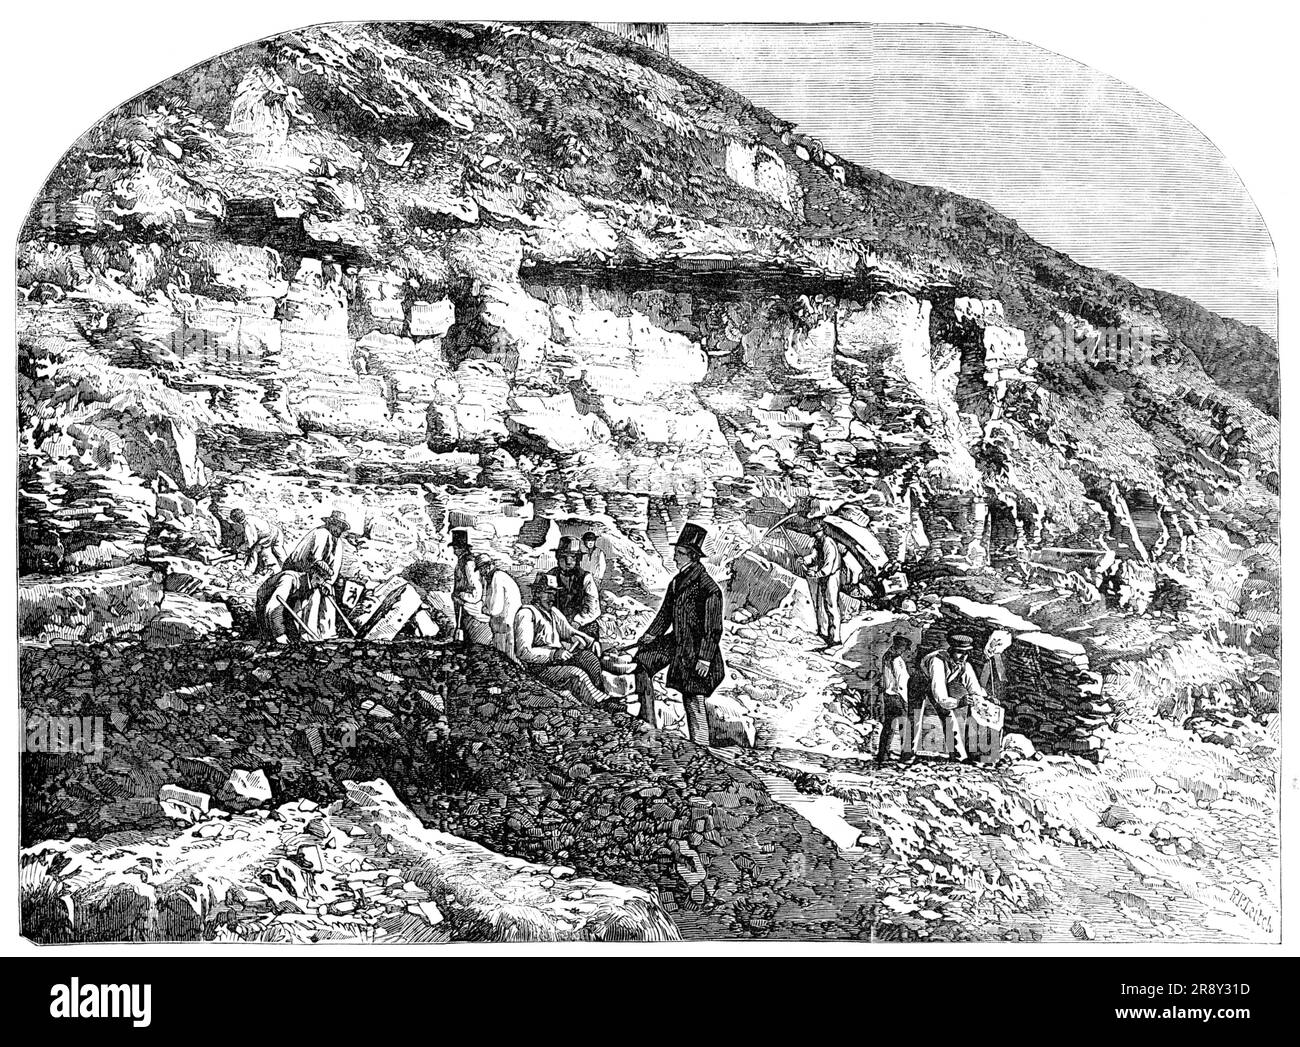 Scene of the Geological Discoveries at Swanage, Dorset - from a photograph by F. Briggs, 1857. 'The excavations...are interesting as the scene of important geological discoveries [including] the jaws of at least fourteen different species of mammalia...It was supposed till very lately that few if any mammalia were to be found below the tertiary rock; and this supposed fact was very comfortable to those who support the doctrine of &quot;progressive development&quot;...that a fish by mere length of time became a reptile, a lemur, an ape, and finally an ape, a man. But...A very ancient bed of the Stock Photo